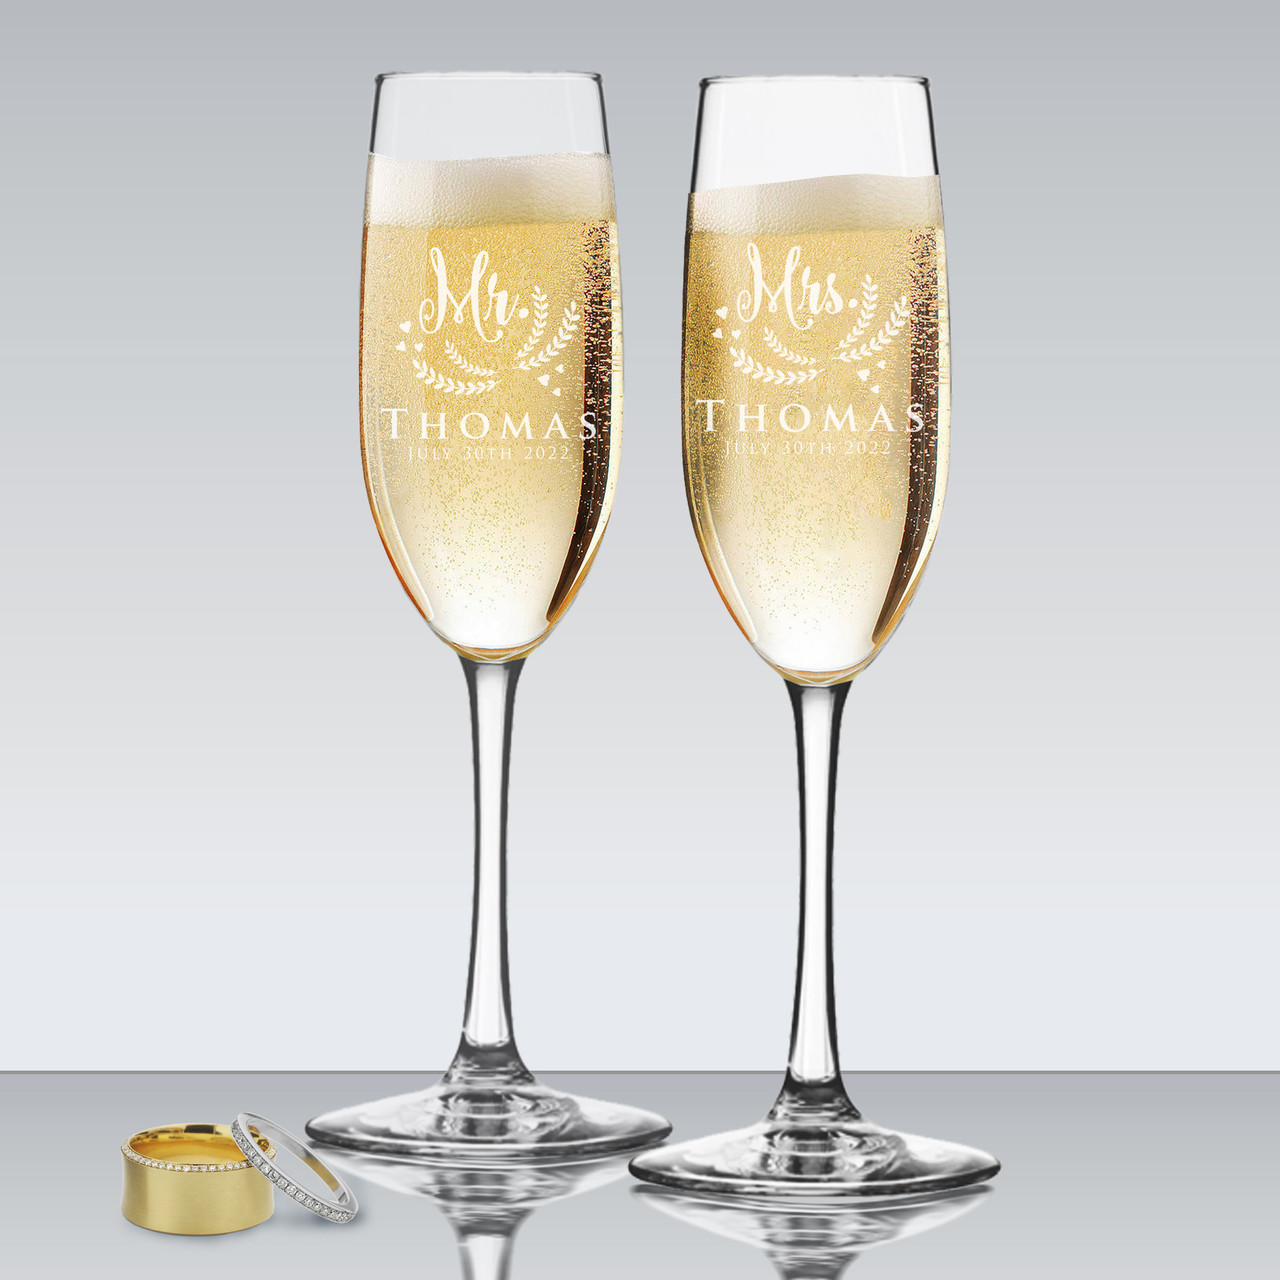 Mr and Mrs Personalized Wedding Toasting Champagne Flute Glasses - Set of 2  - My Personal Memories